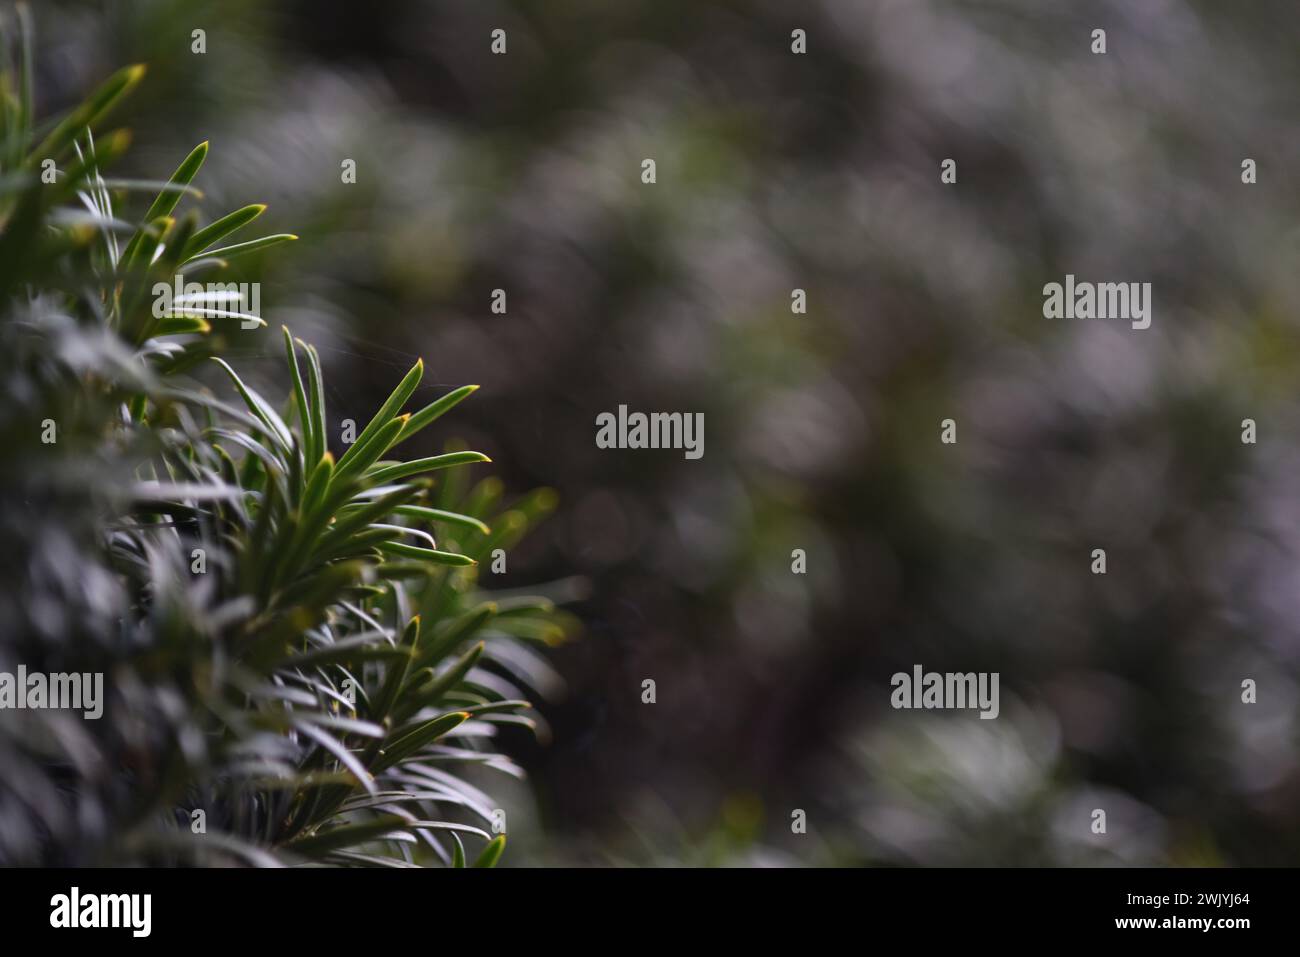 Green blurry nature background with a branch of common yew tree in focus with copy space. Element of design. Stock Photo